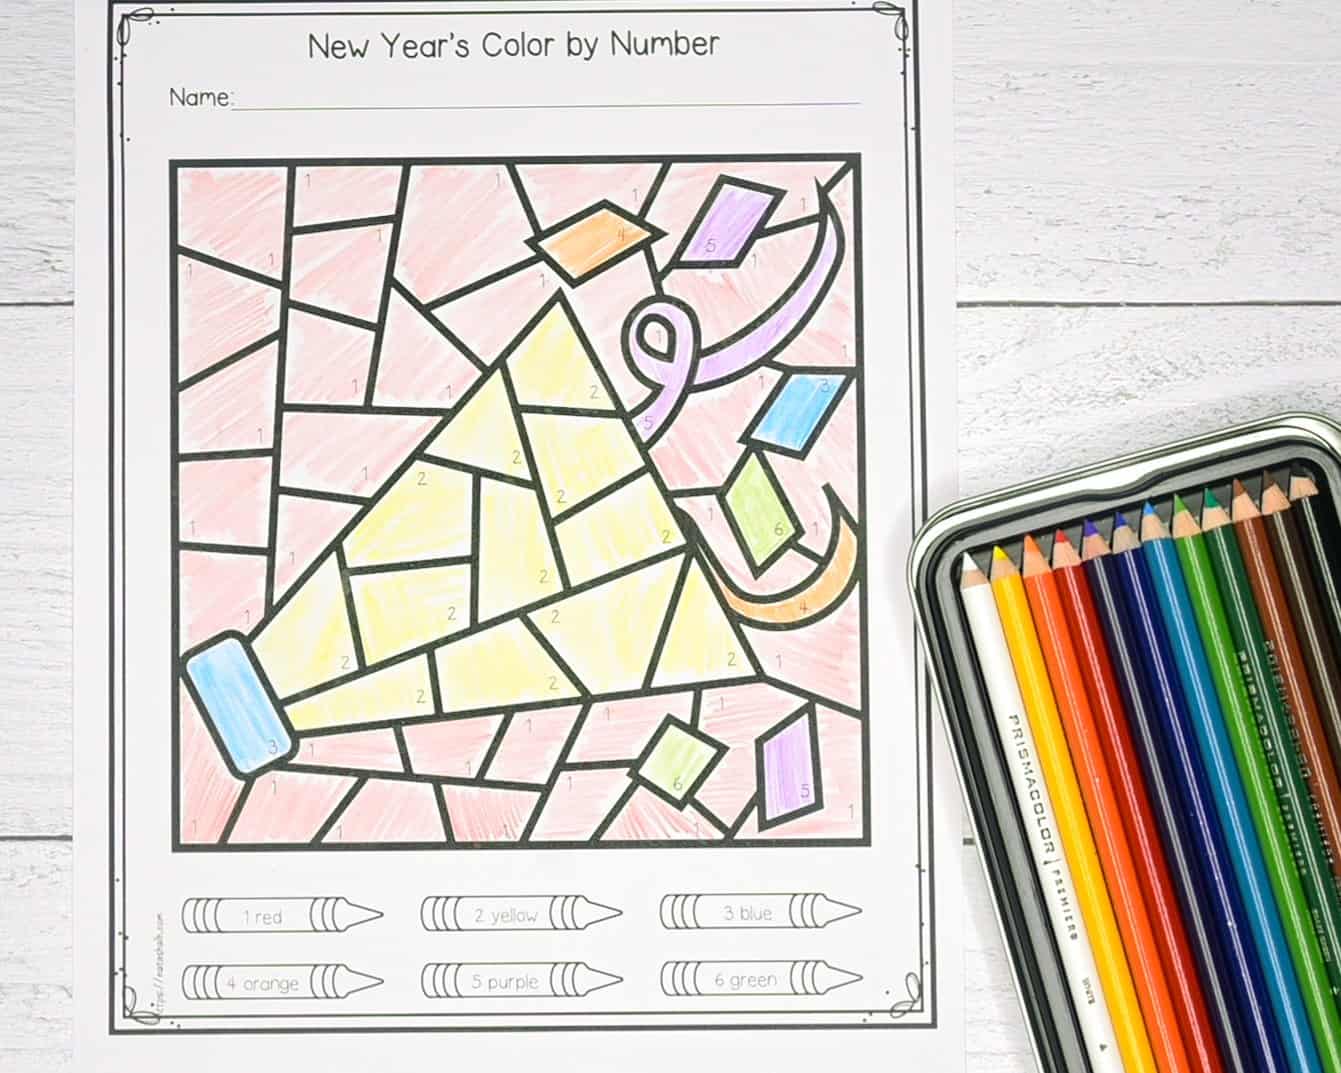 A top down photo of a New Year's color by number page with a box of colored pencils